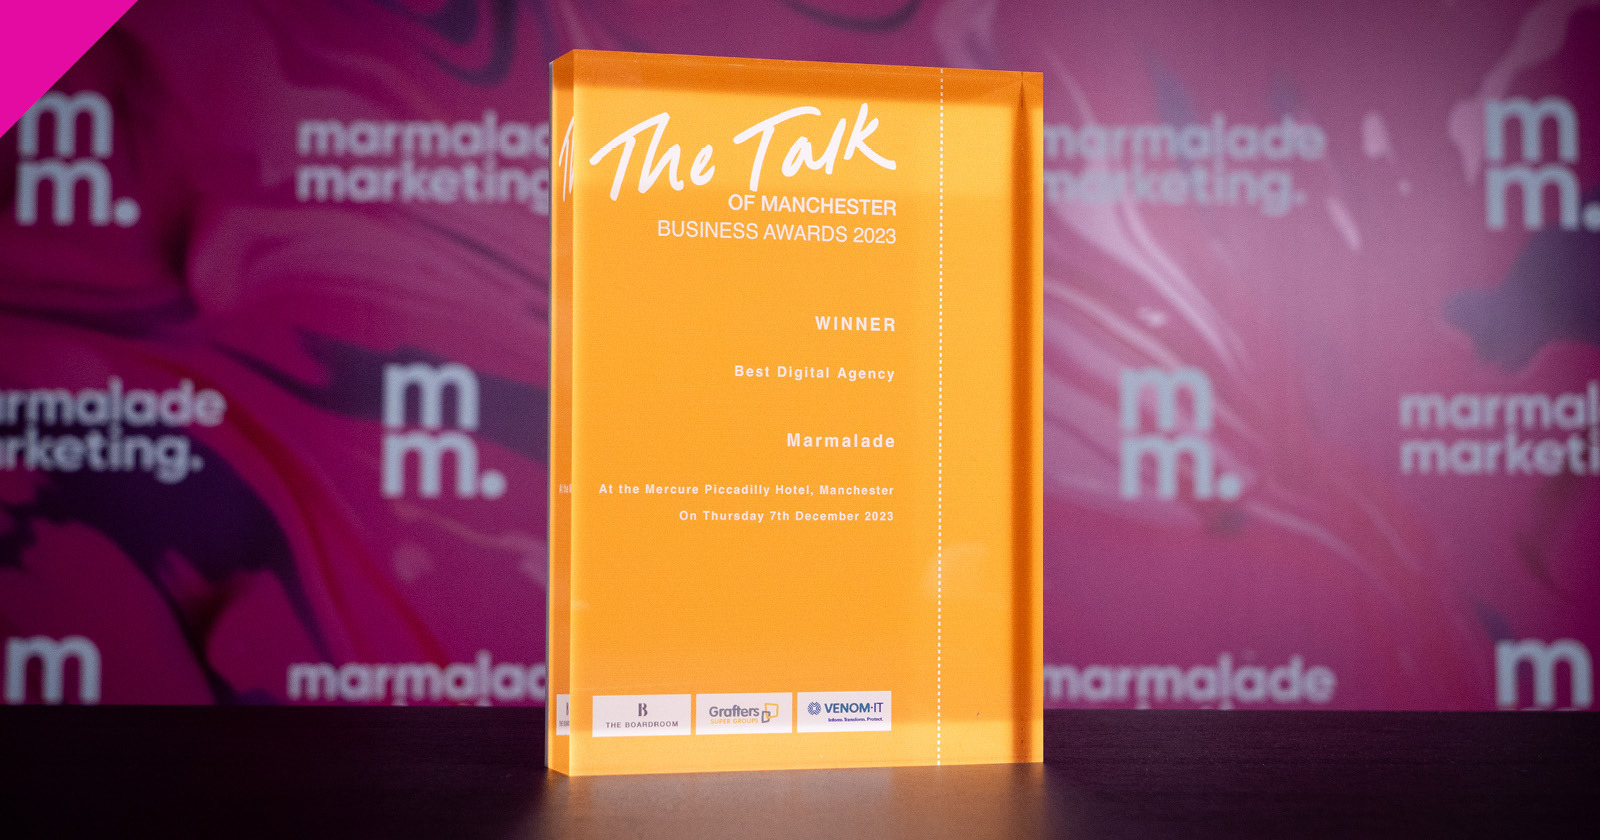 Image of the Talk of Manchester Award